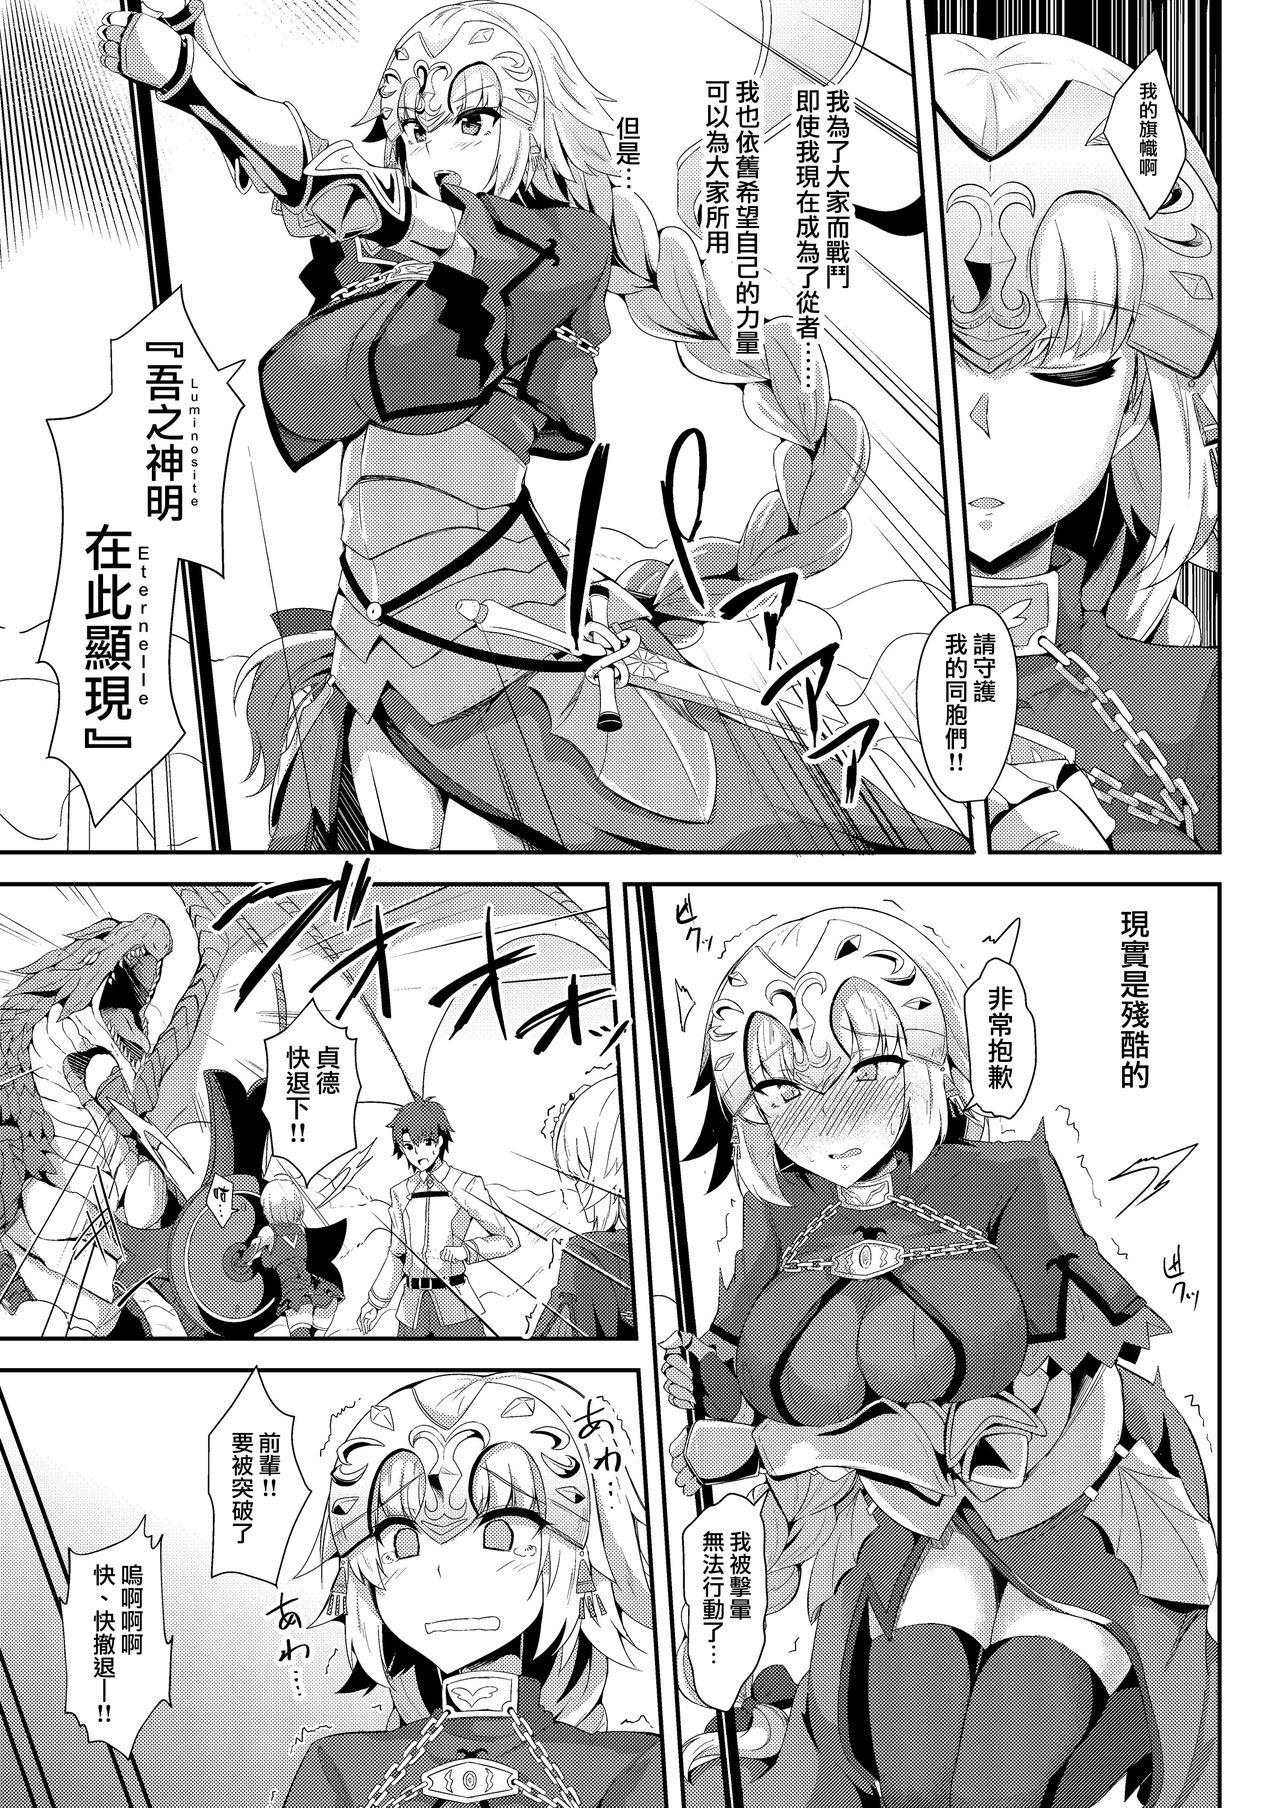 Audition Jeanne no Onegai Kanaechaou!! - Fate grand order Africa - Page 4